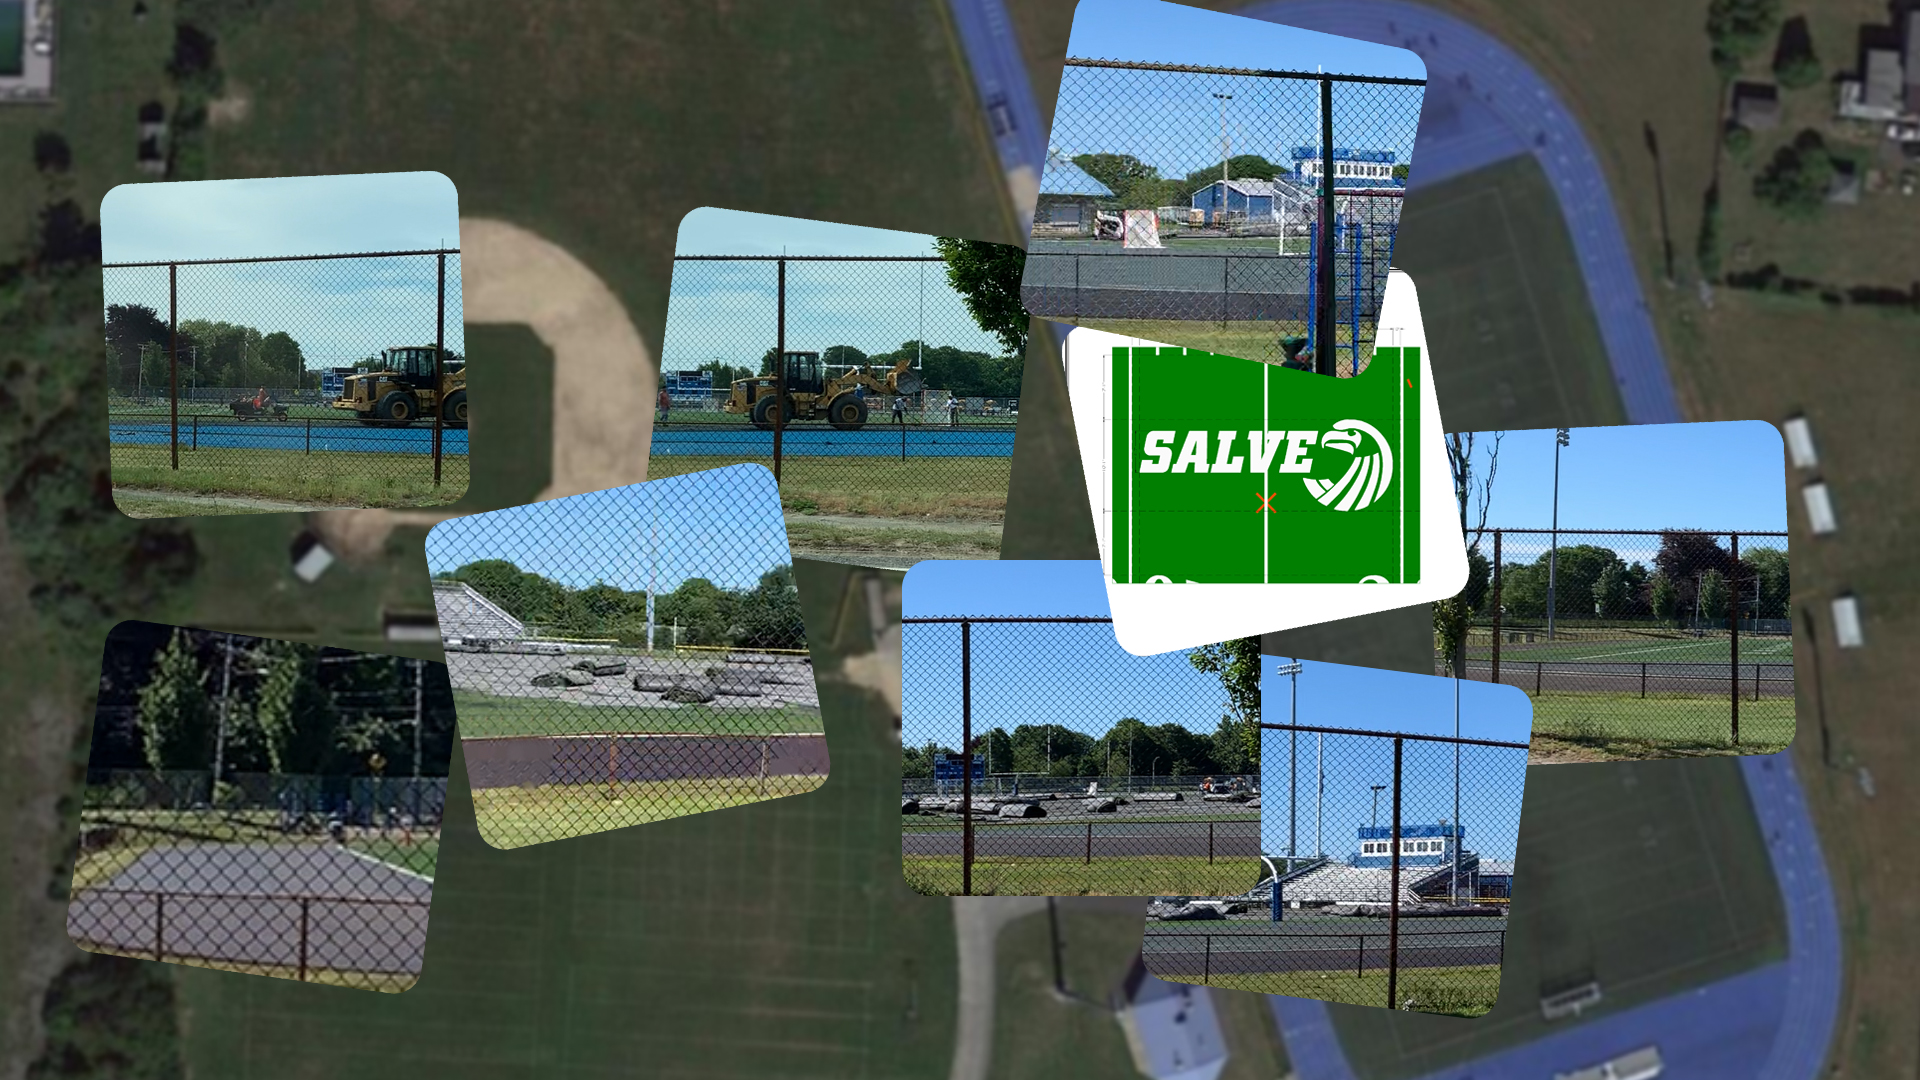 New FieldTurf installation and track replacement happening at Gaudet Athletic Complex with Salve Regina University and Middletown partnership.